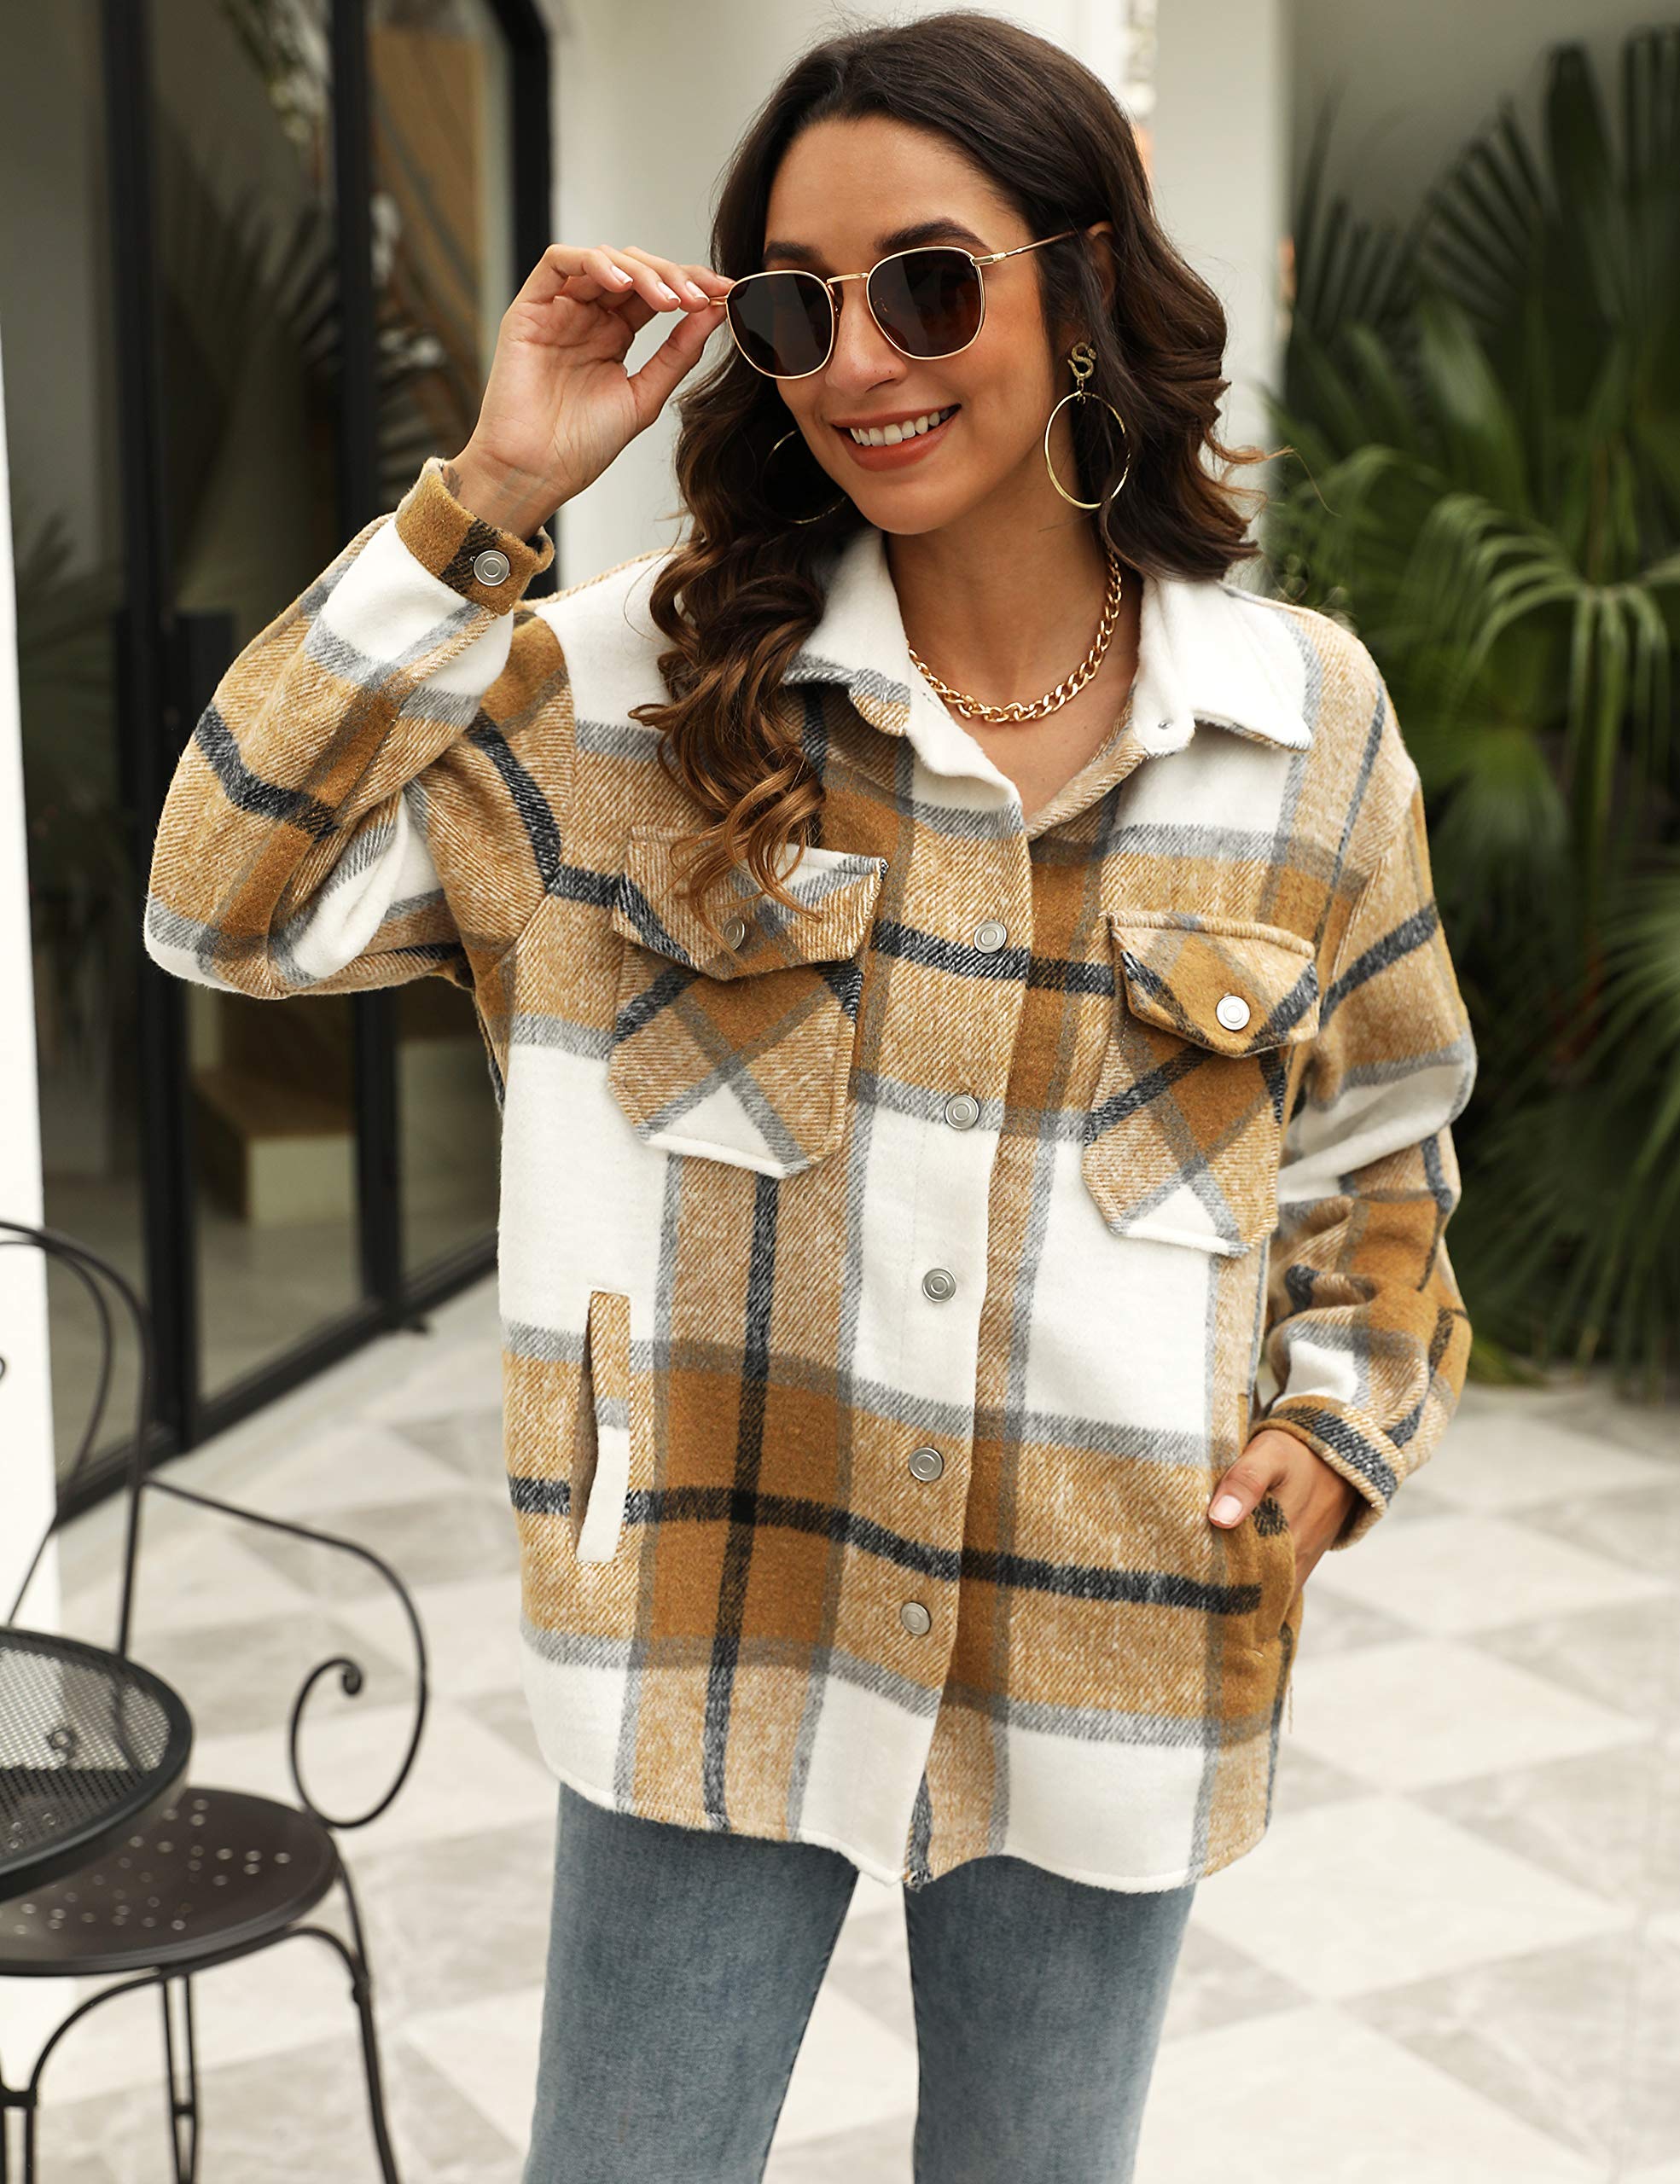 UANEO Womens Plaid Shacket Button Down Wool Blend Fall Flannel Shirt Jacket